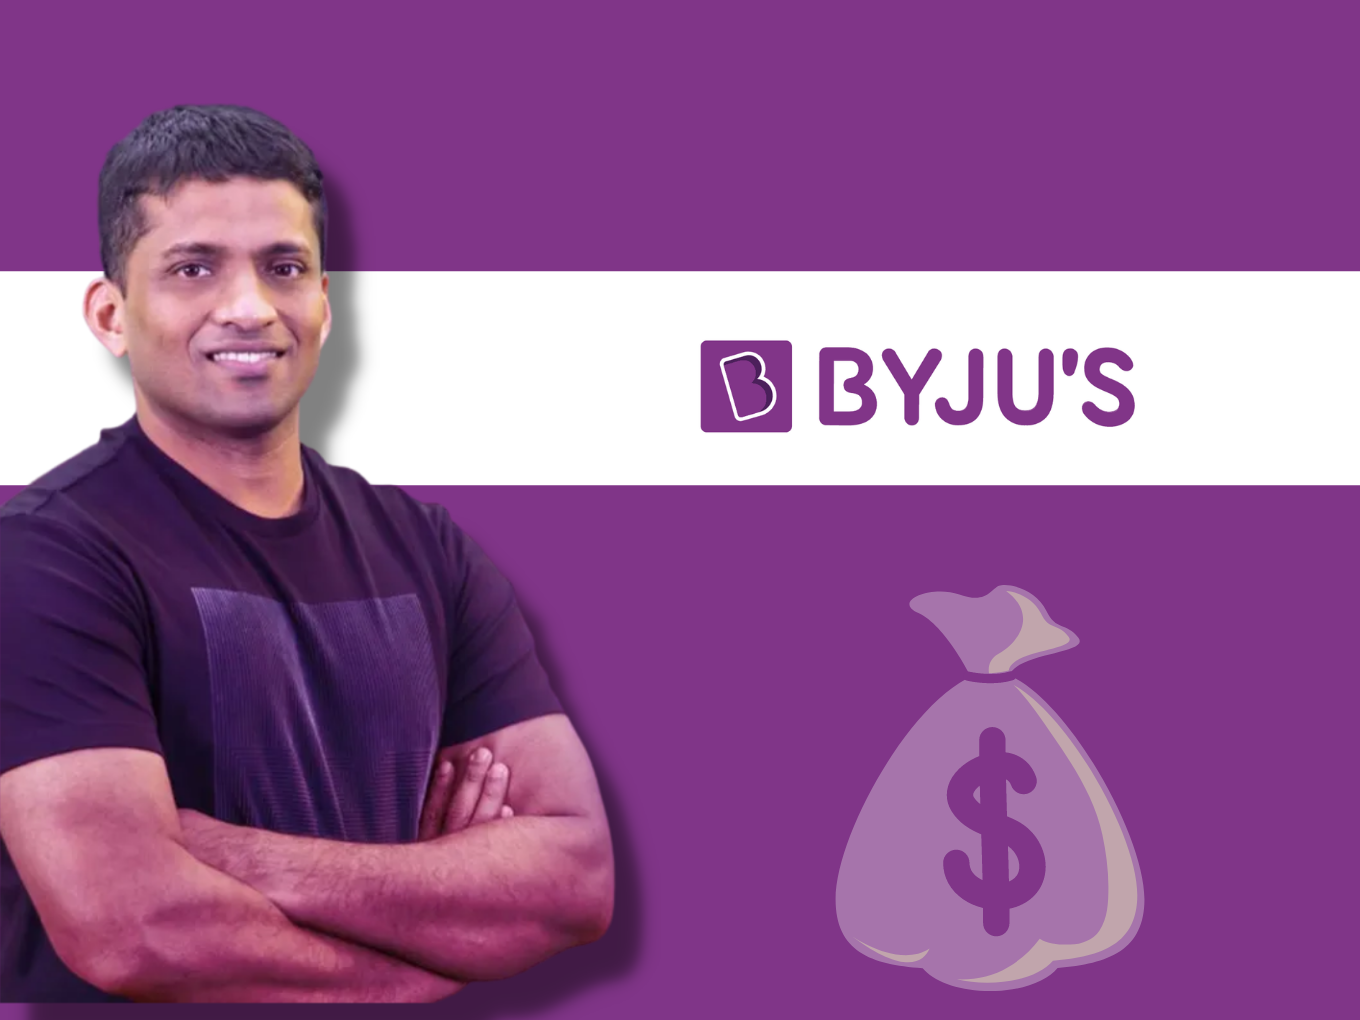 Byju's-owned Great Learning has come under fire for allegedly "mis-selling" an IIT-Bombay course.